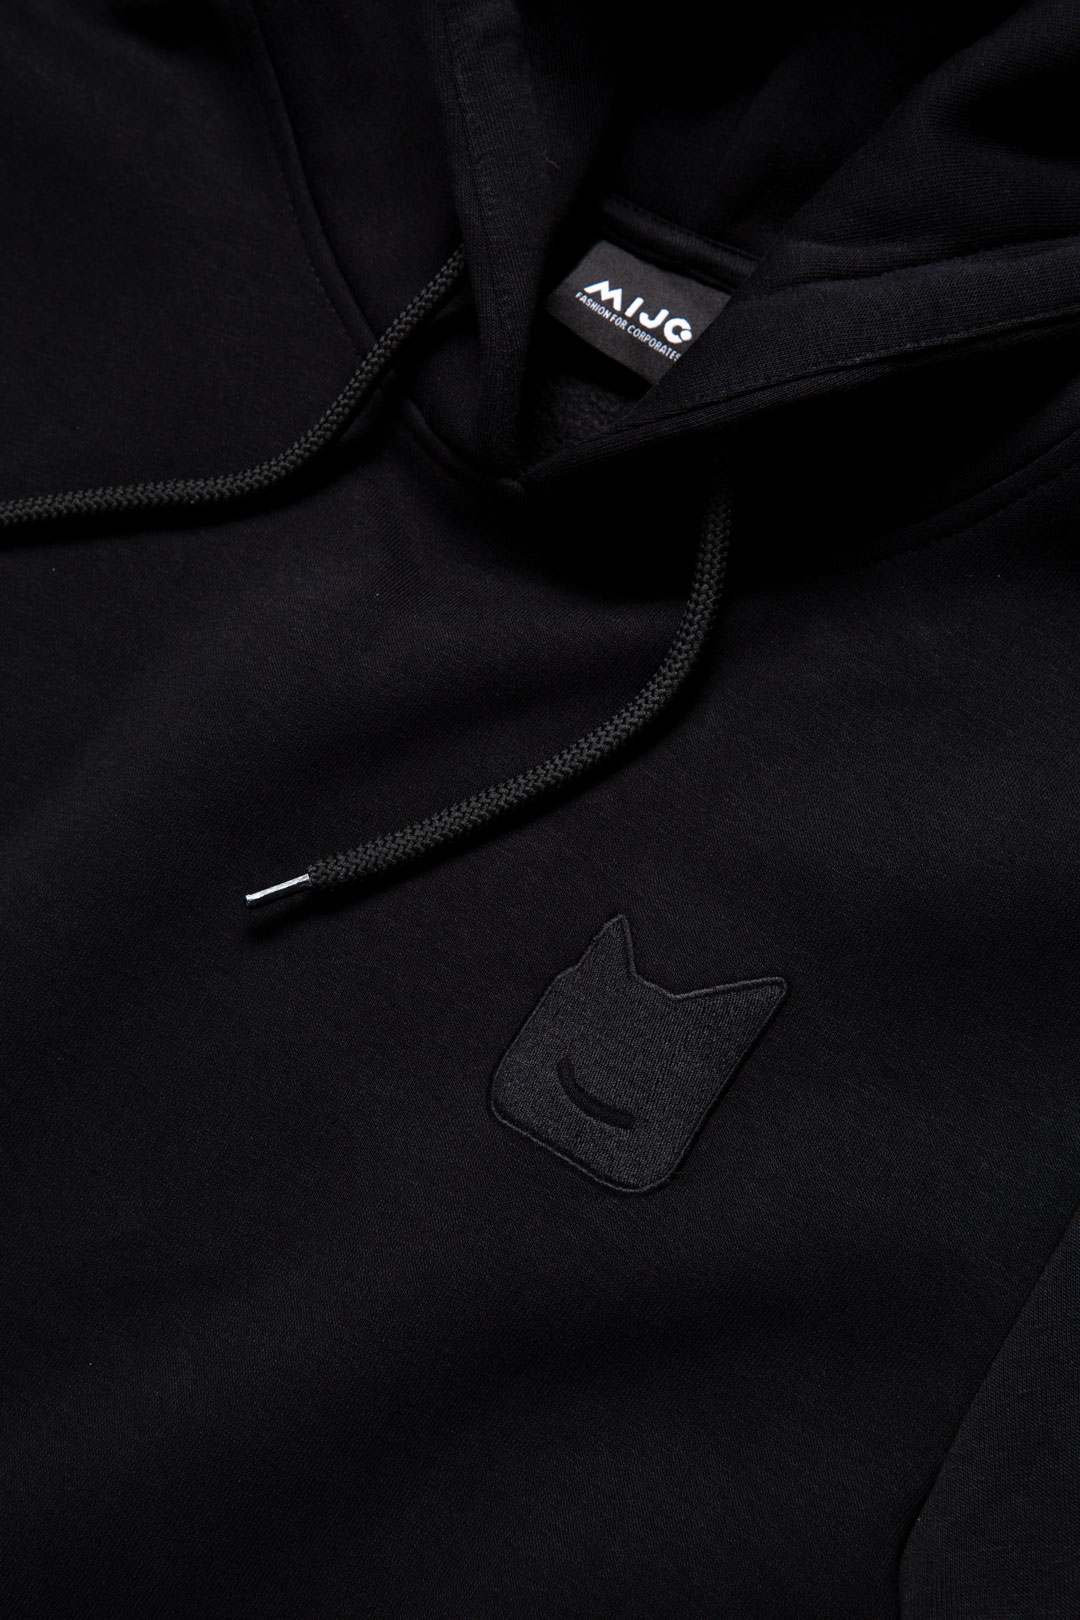 Embroidered logo on a black hoodie from mijo. Corporate Fashion.